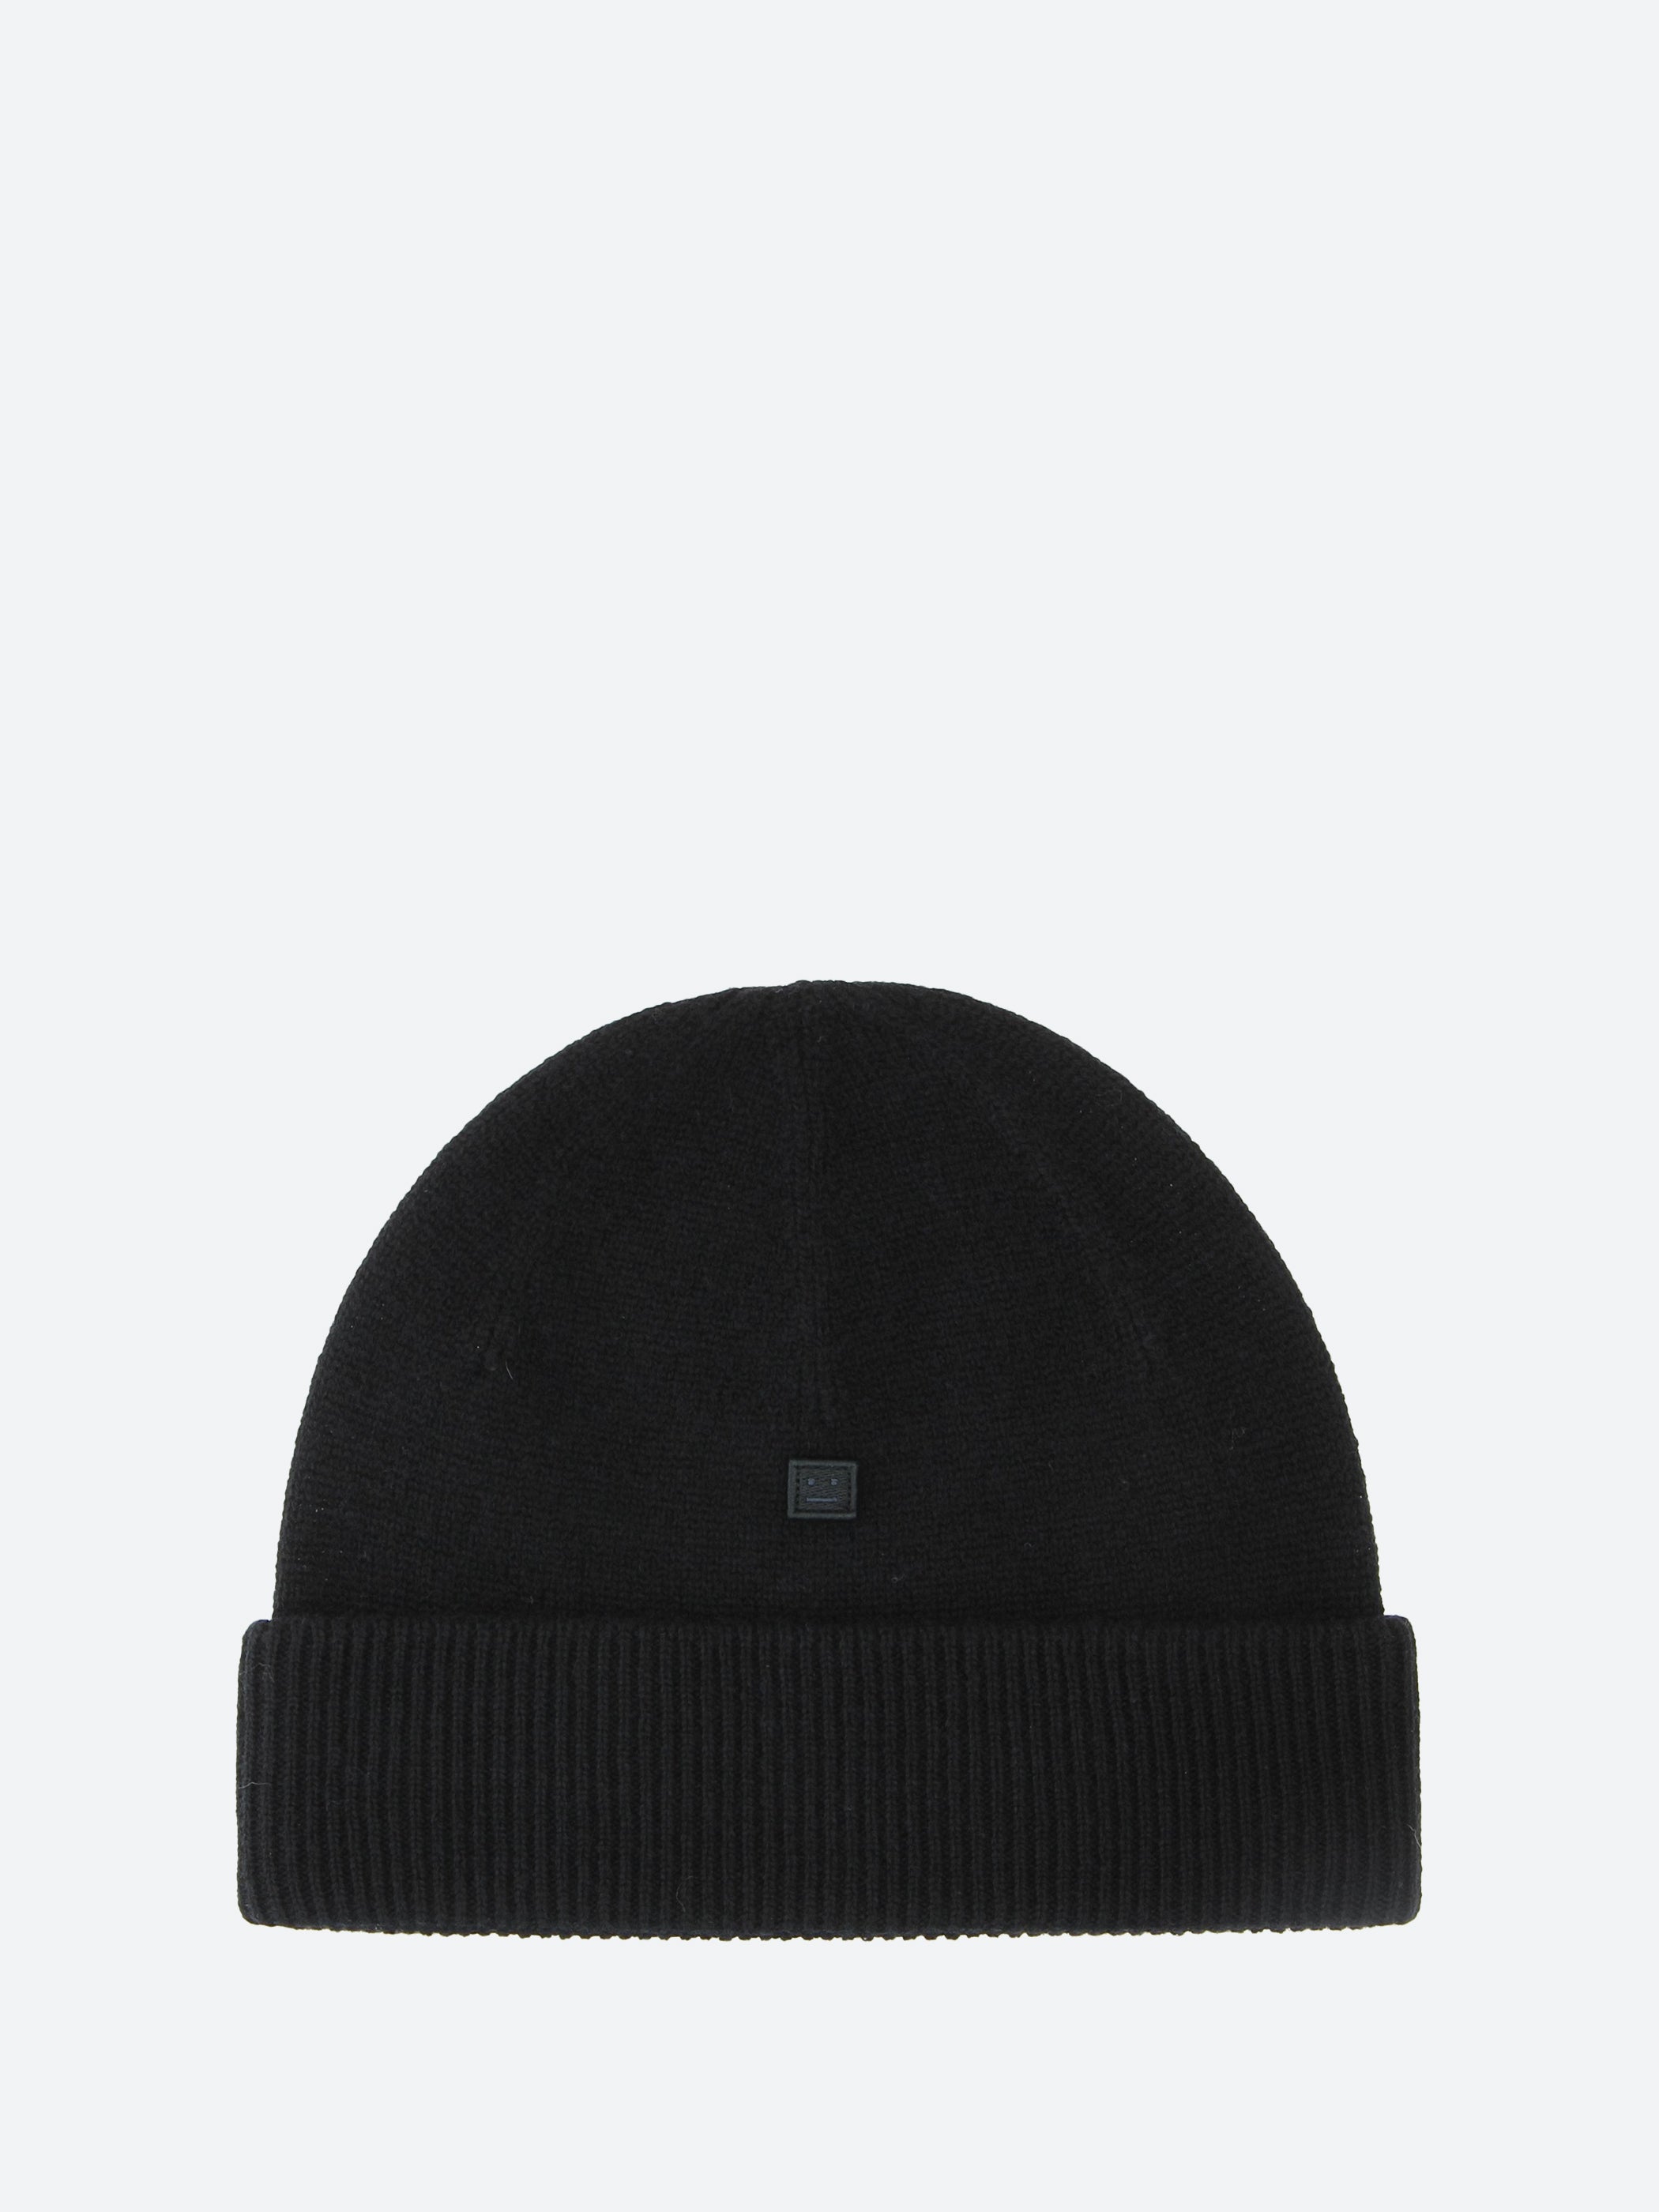 Micro Face Patch Beanie